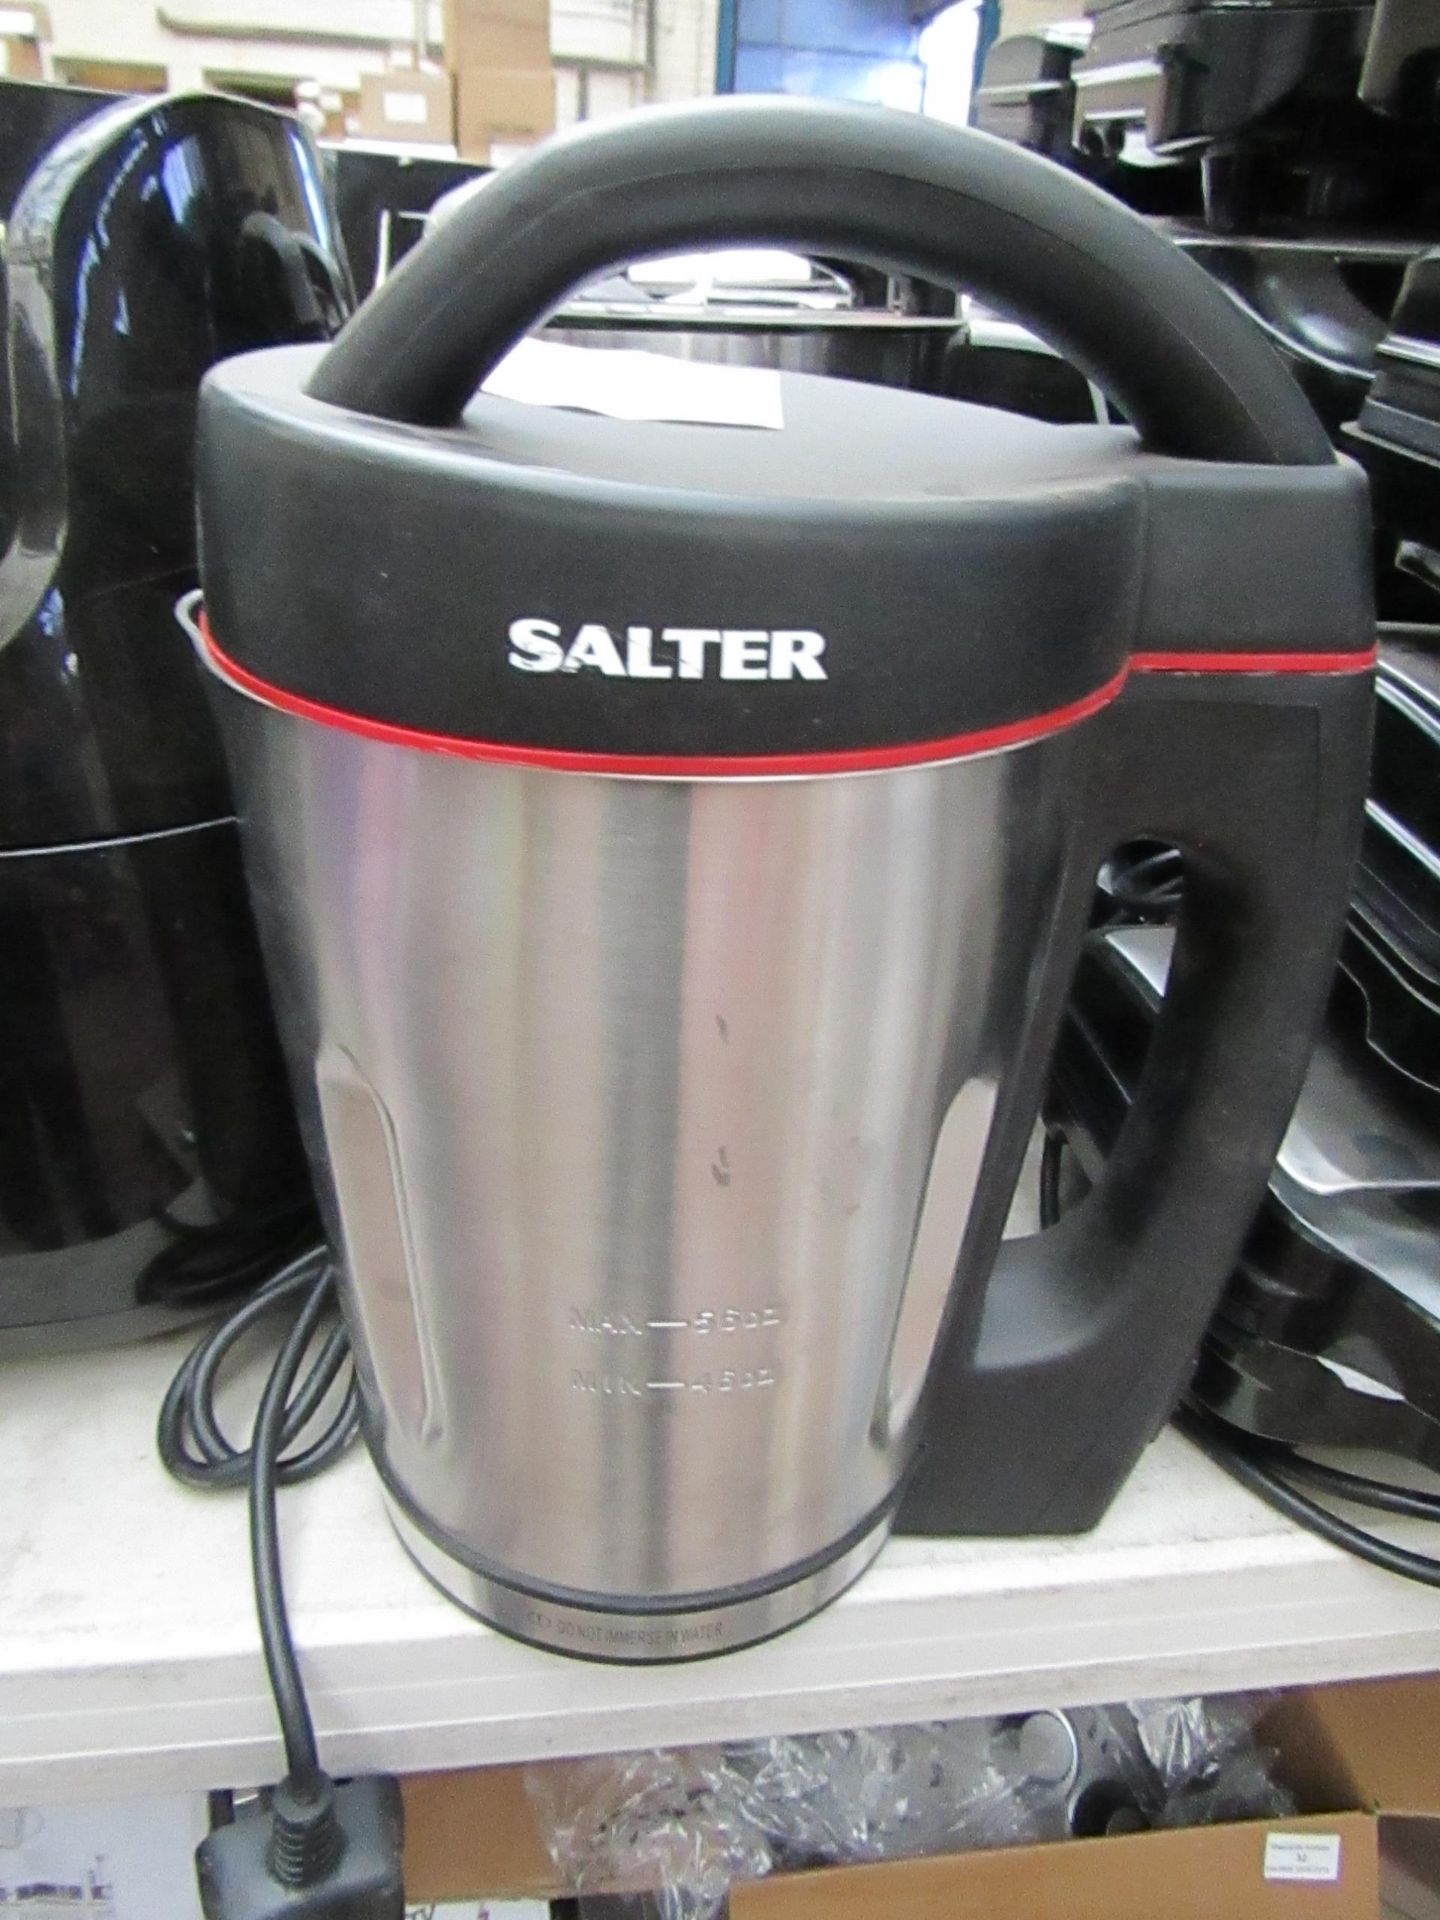 Salter hot soup maker, powers on.